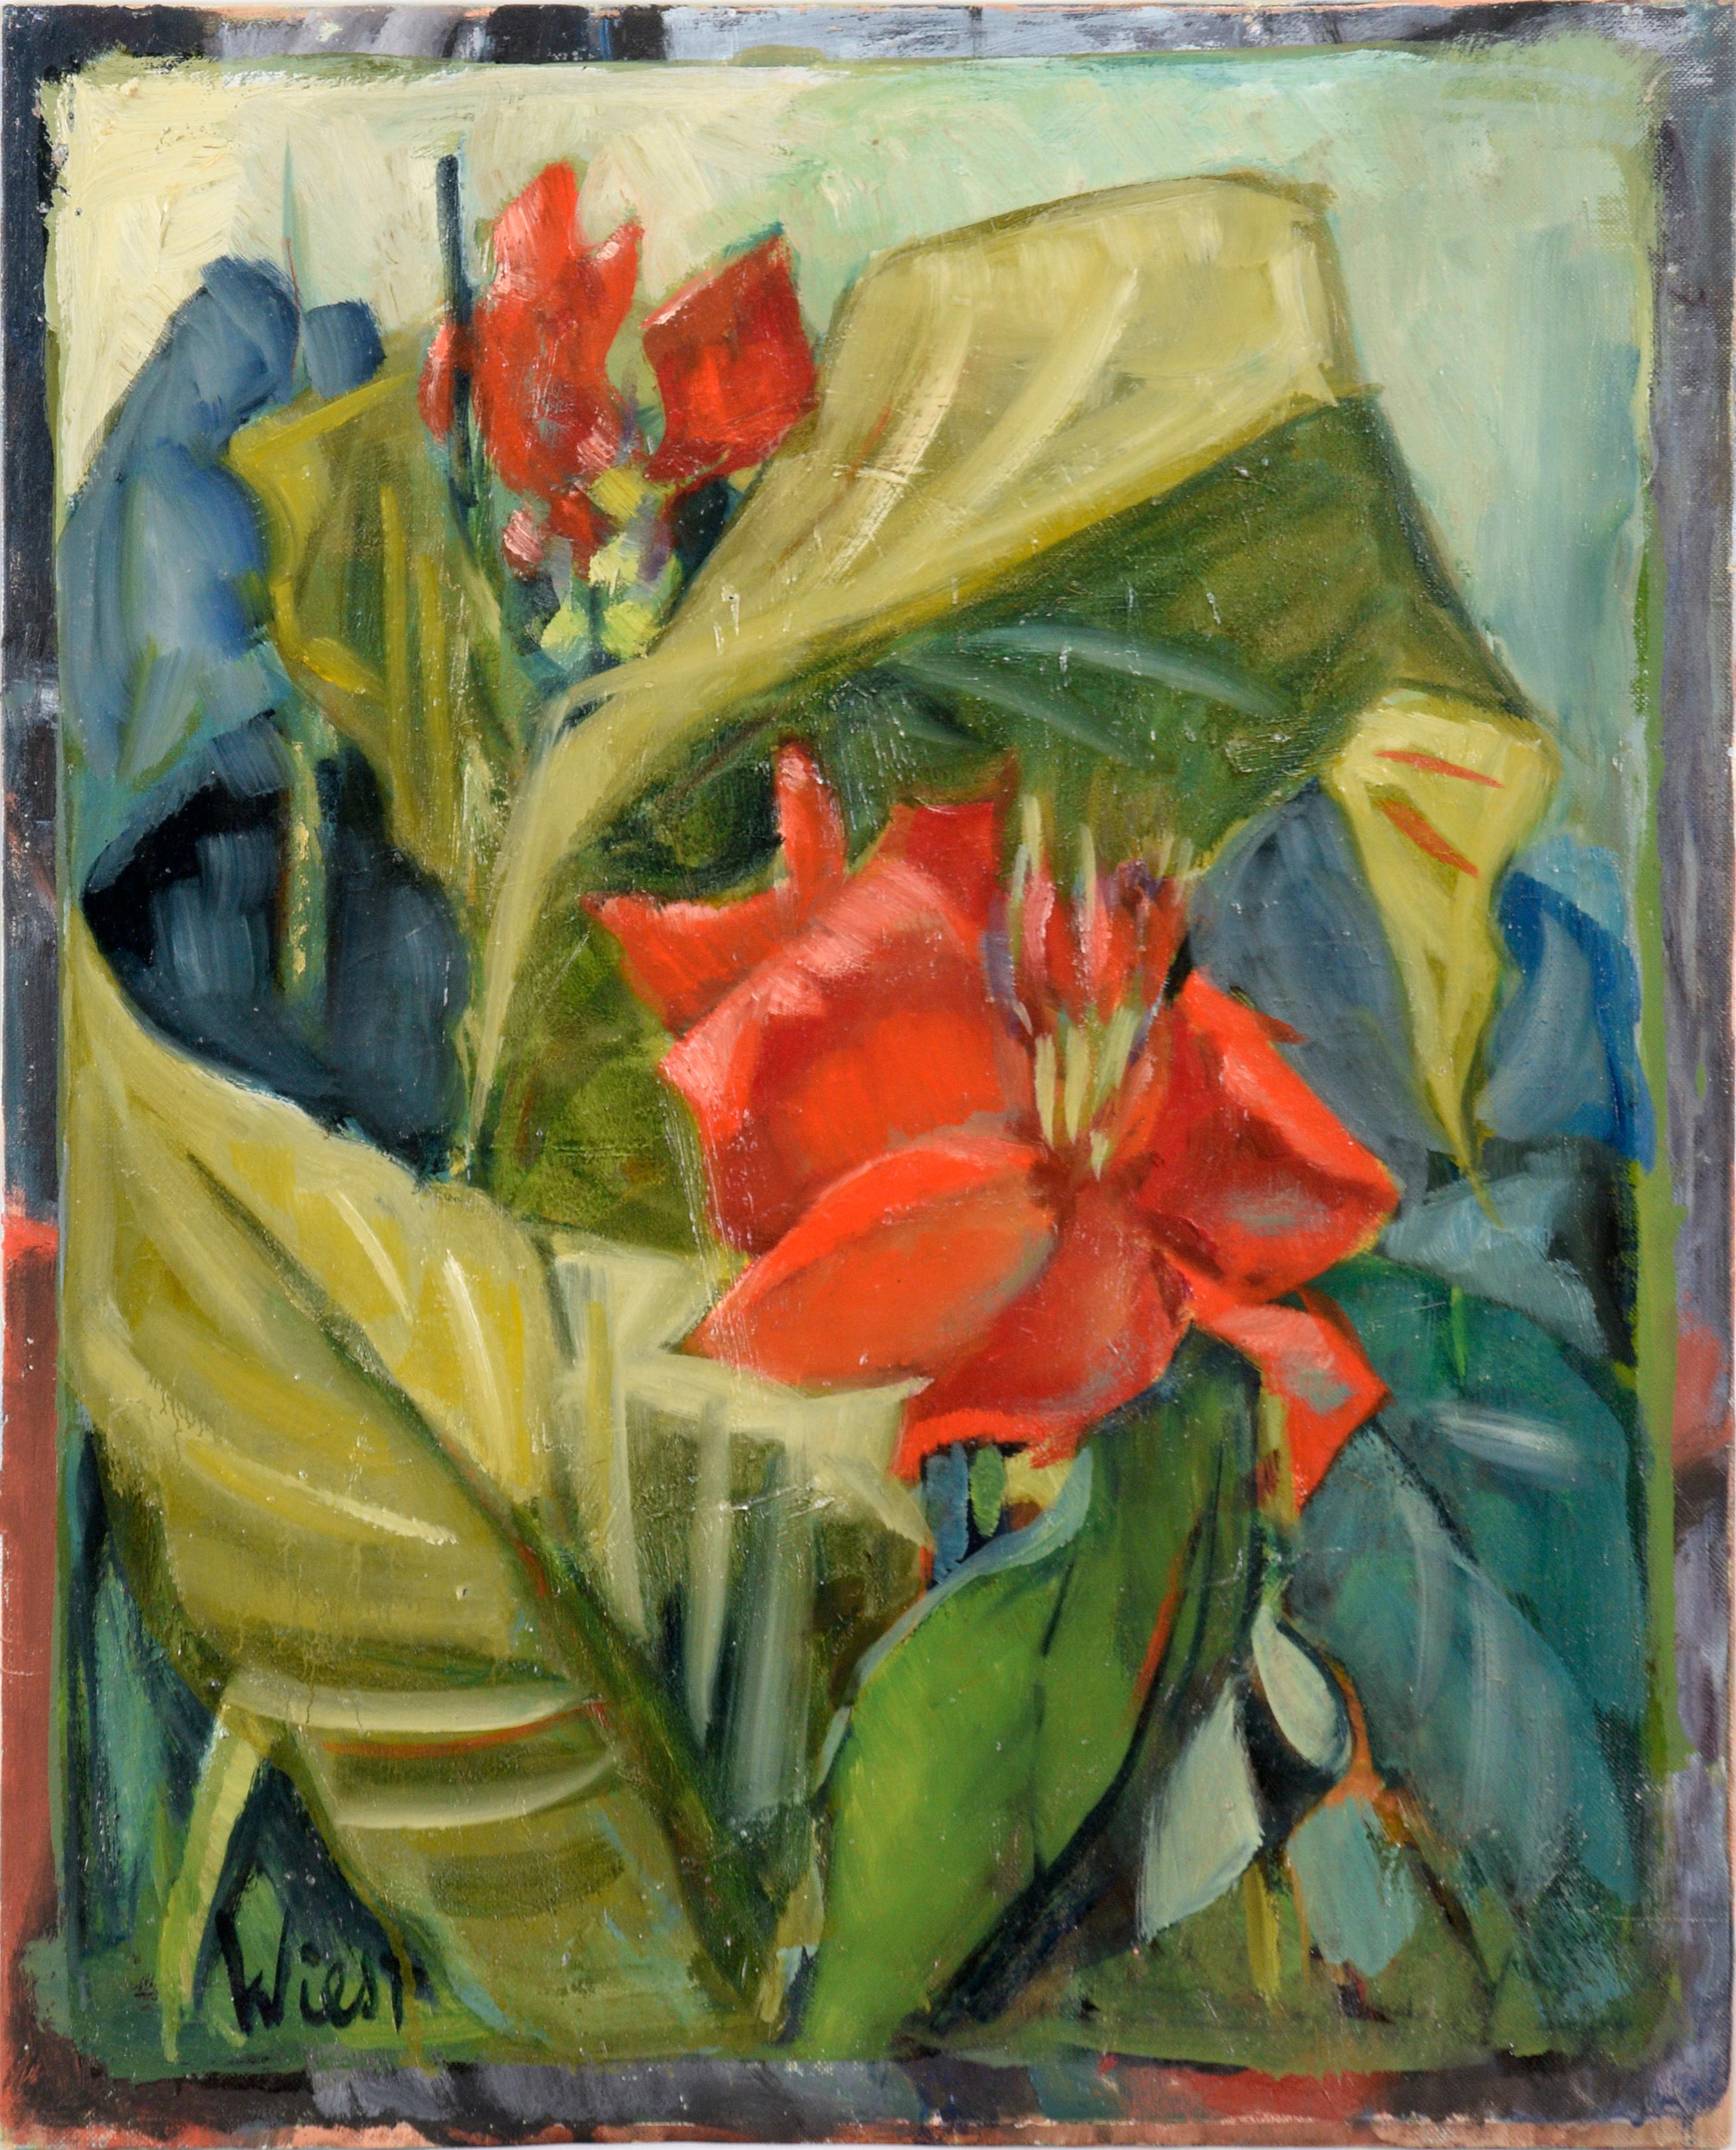 "Canna Lilies" - Modernist Still Life in Oil on Artist's Board